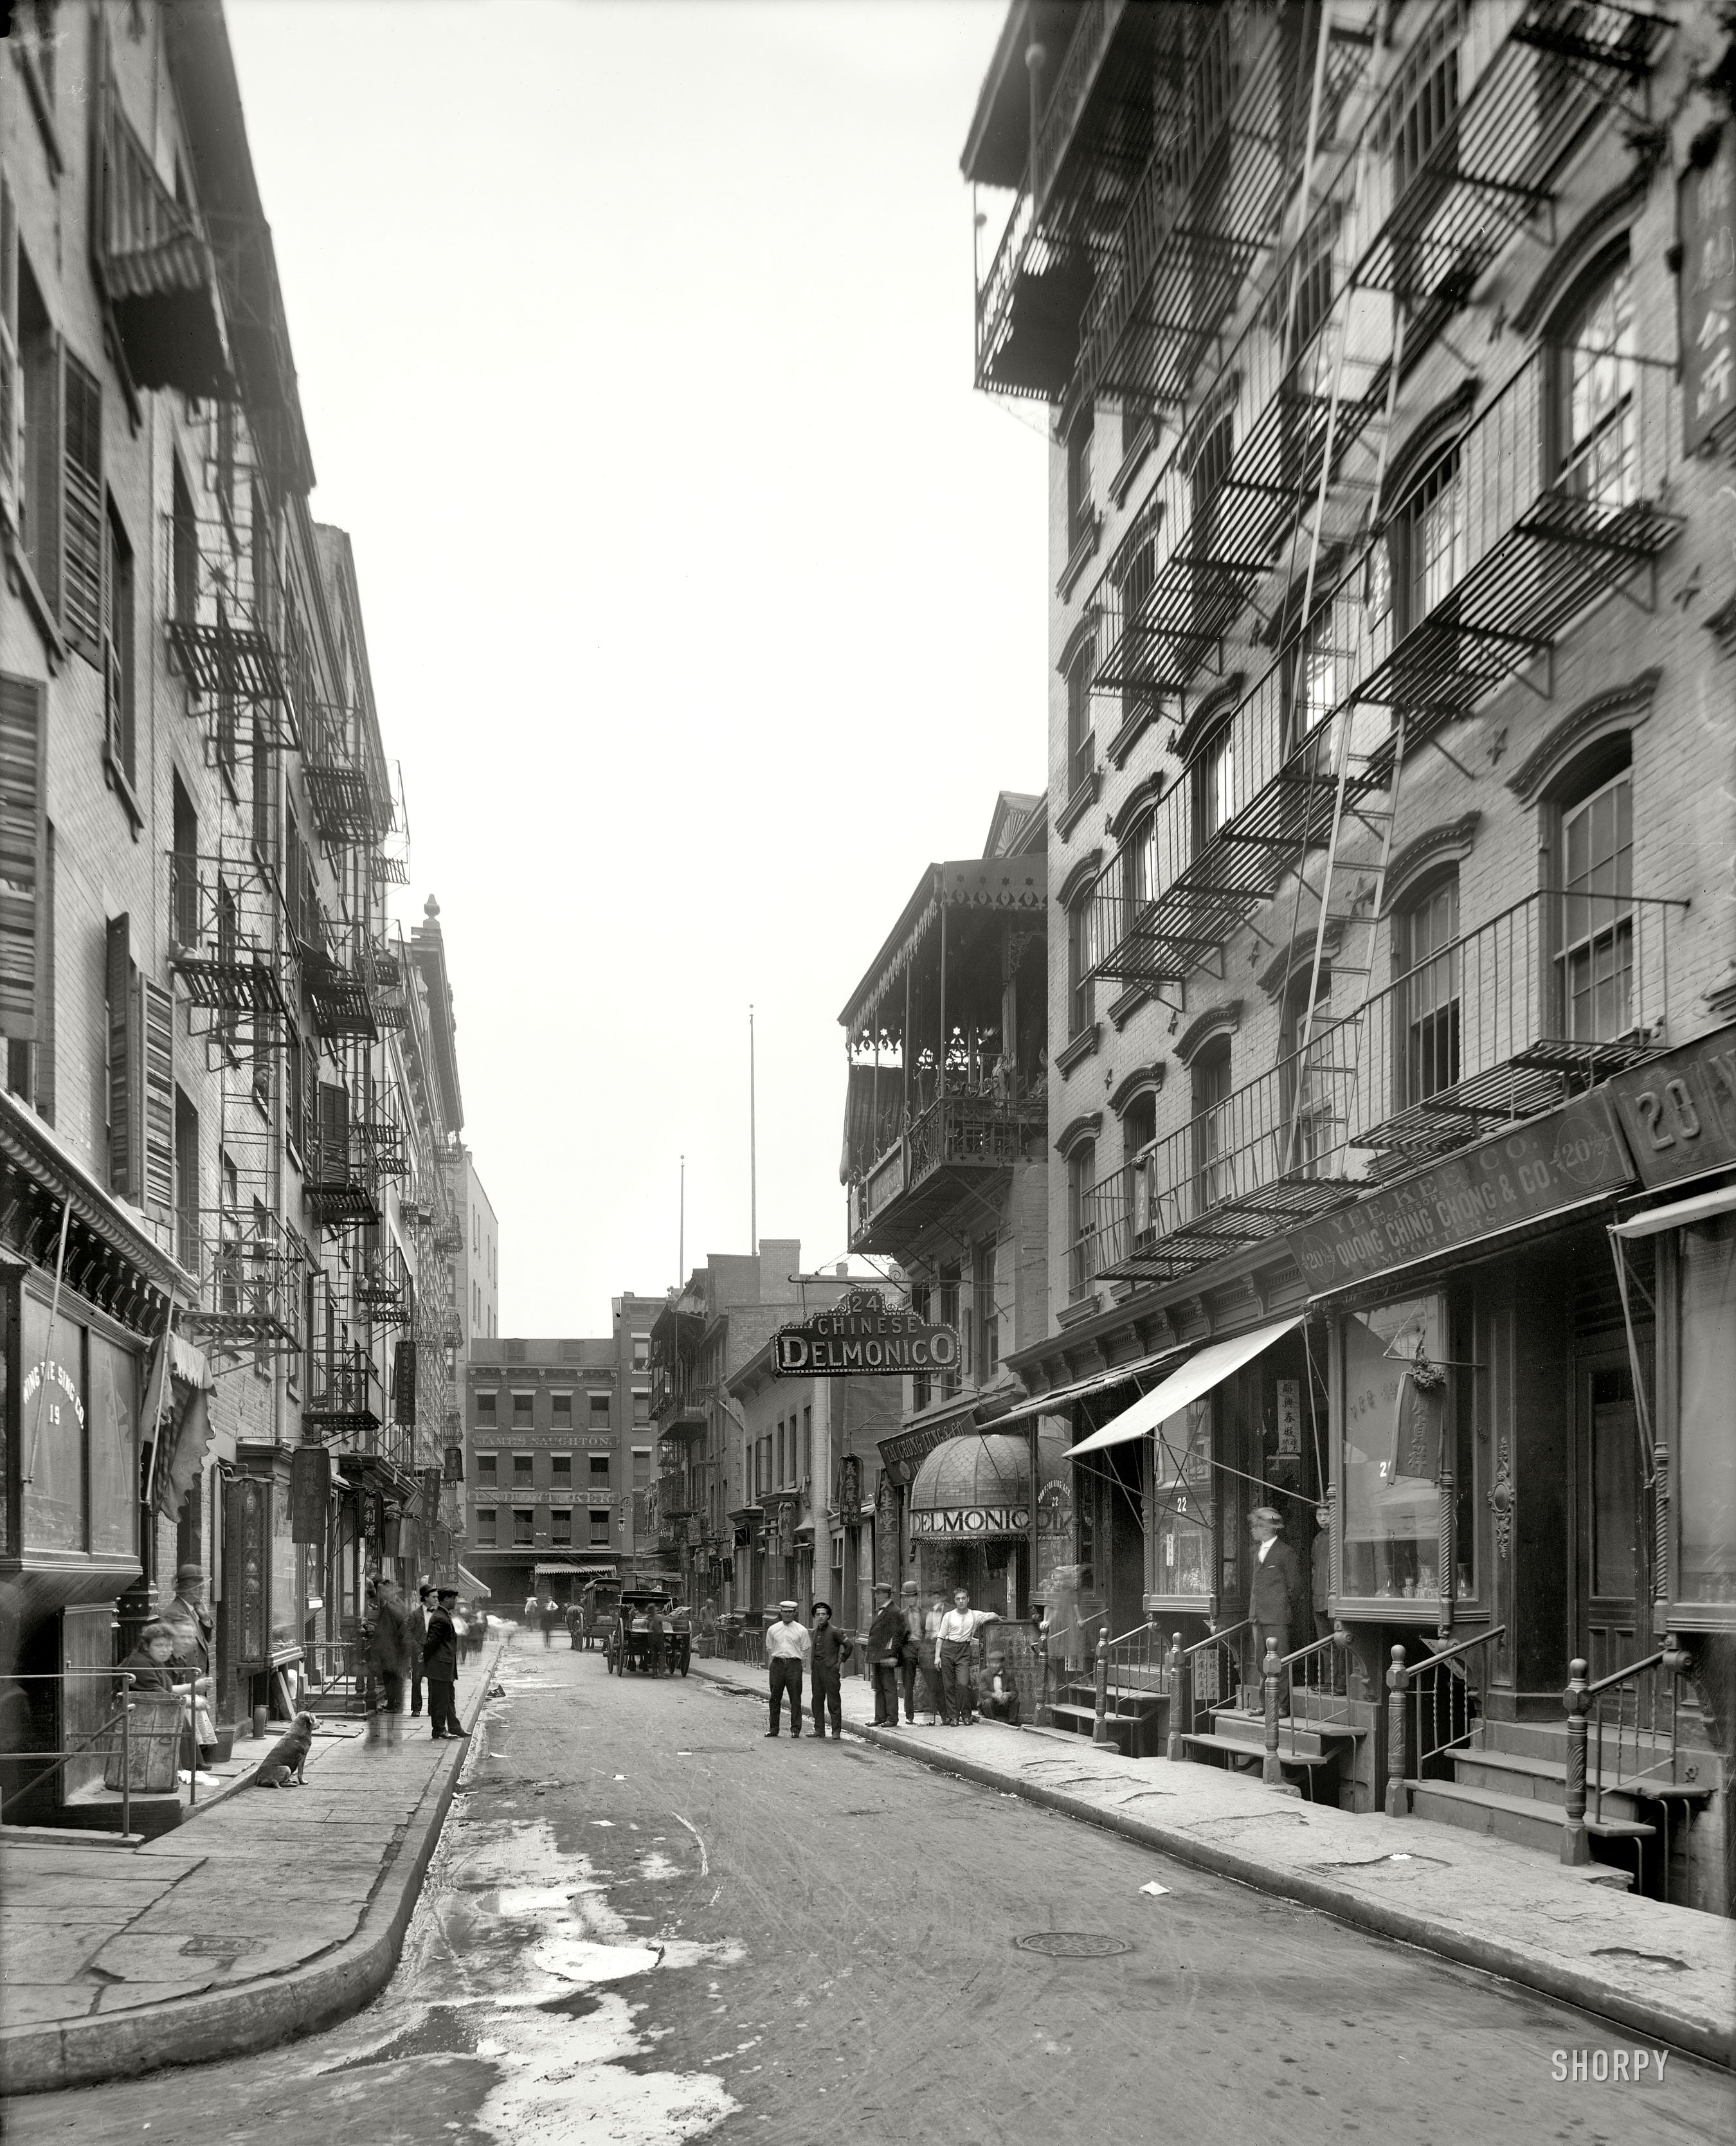 New York circa 1910. "Pell Street, Chinatown." Mon Lay Won, a restaurant that billed itself as the "Chinese Delmonico," figured in the Tong Wars of the early 20th century. 8x10 glass negative, Detroit Publishing Co. View full size.